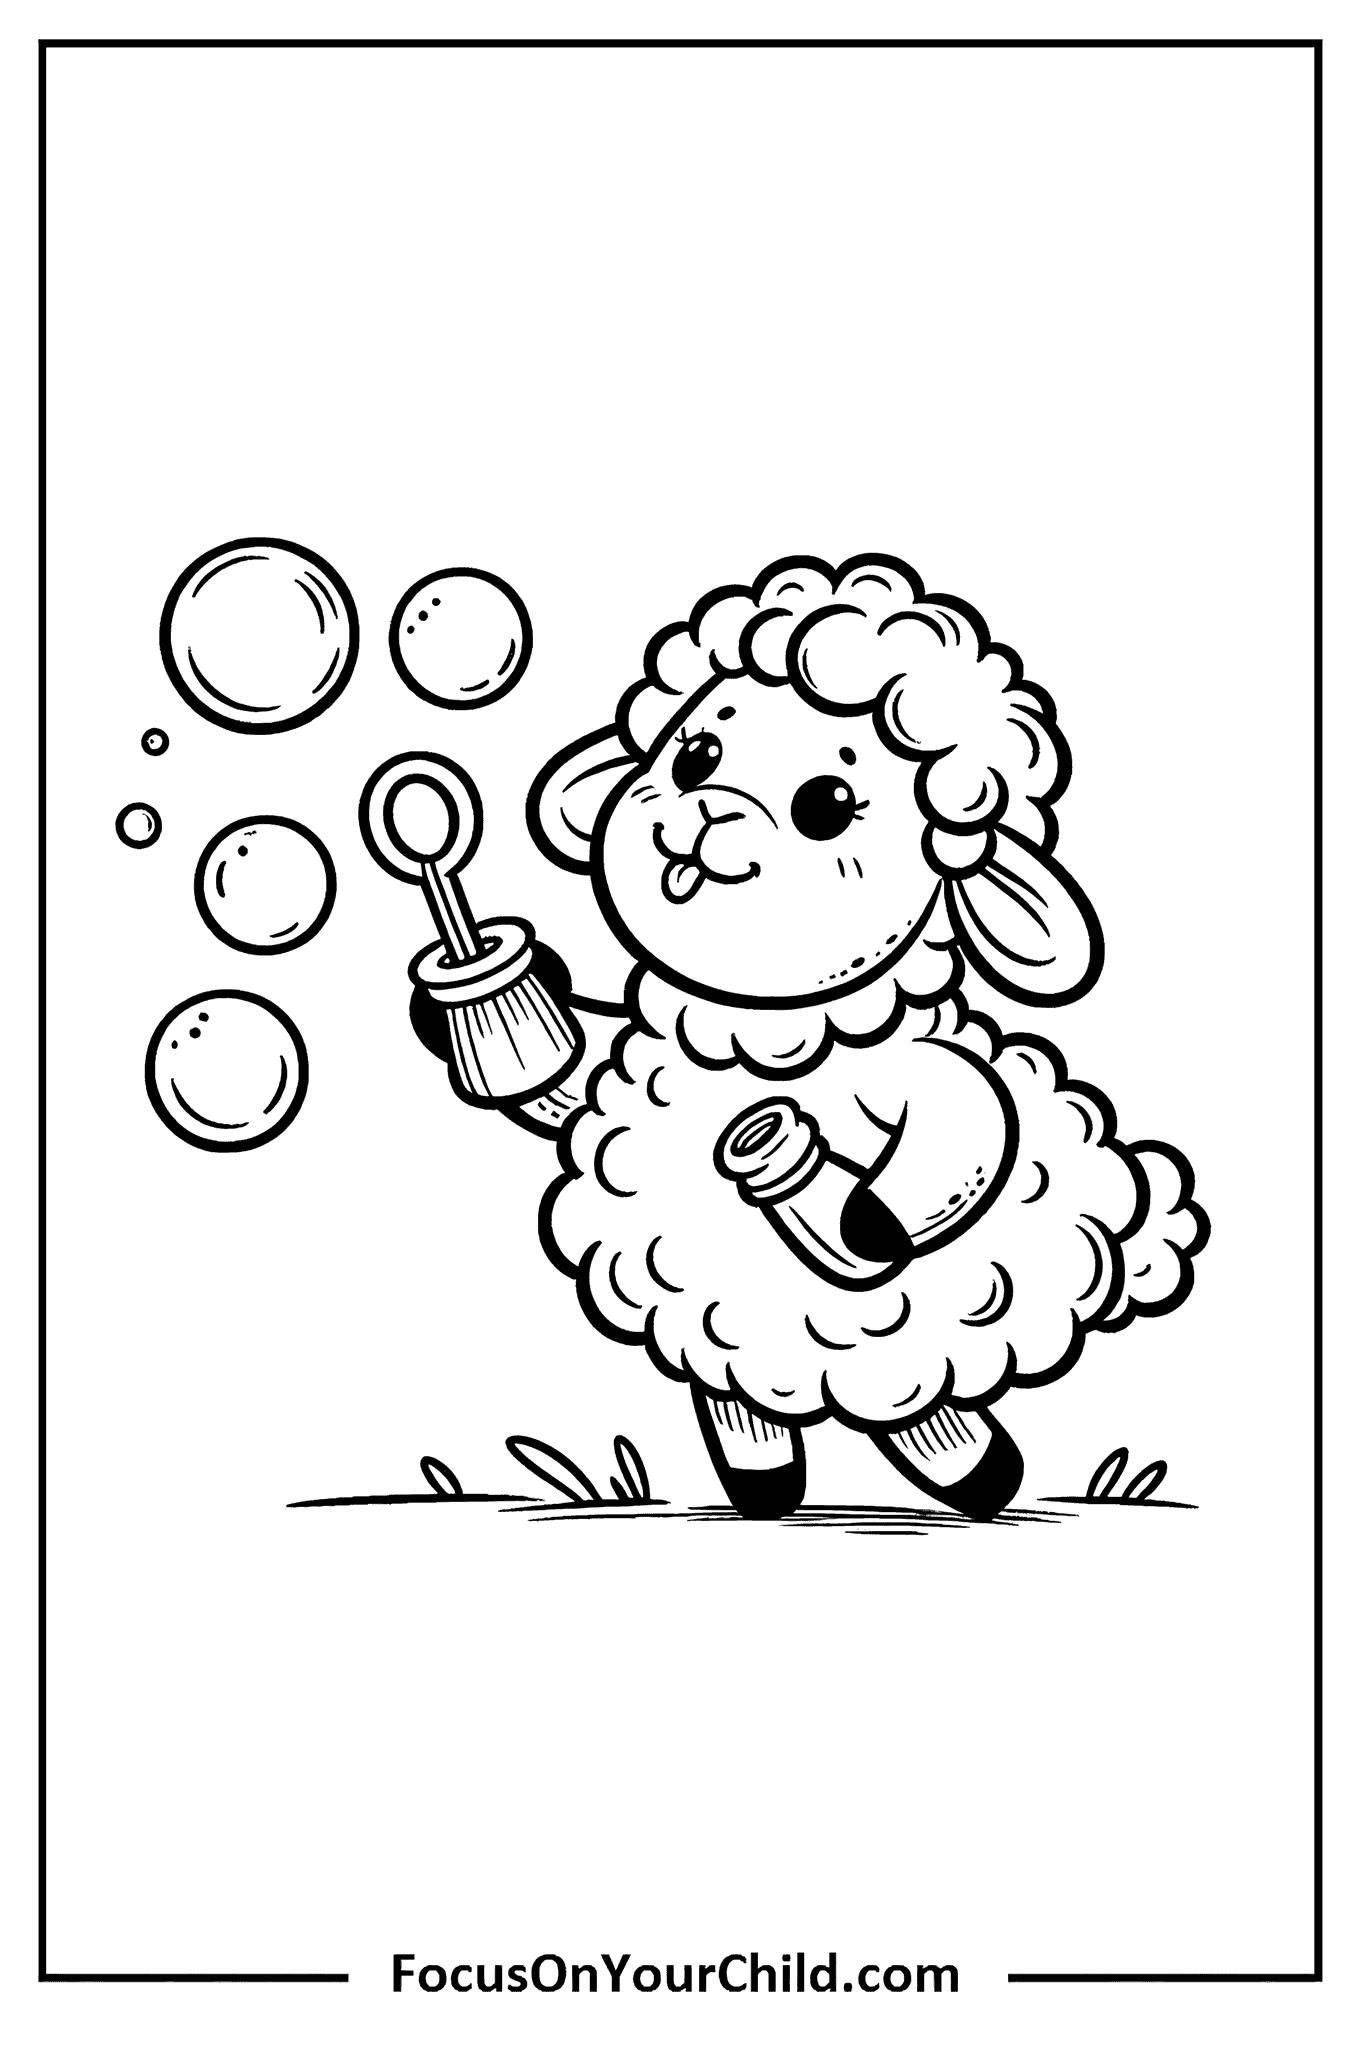 Charming line drawing of playful lamb blowing bubbles in black and white.